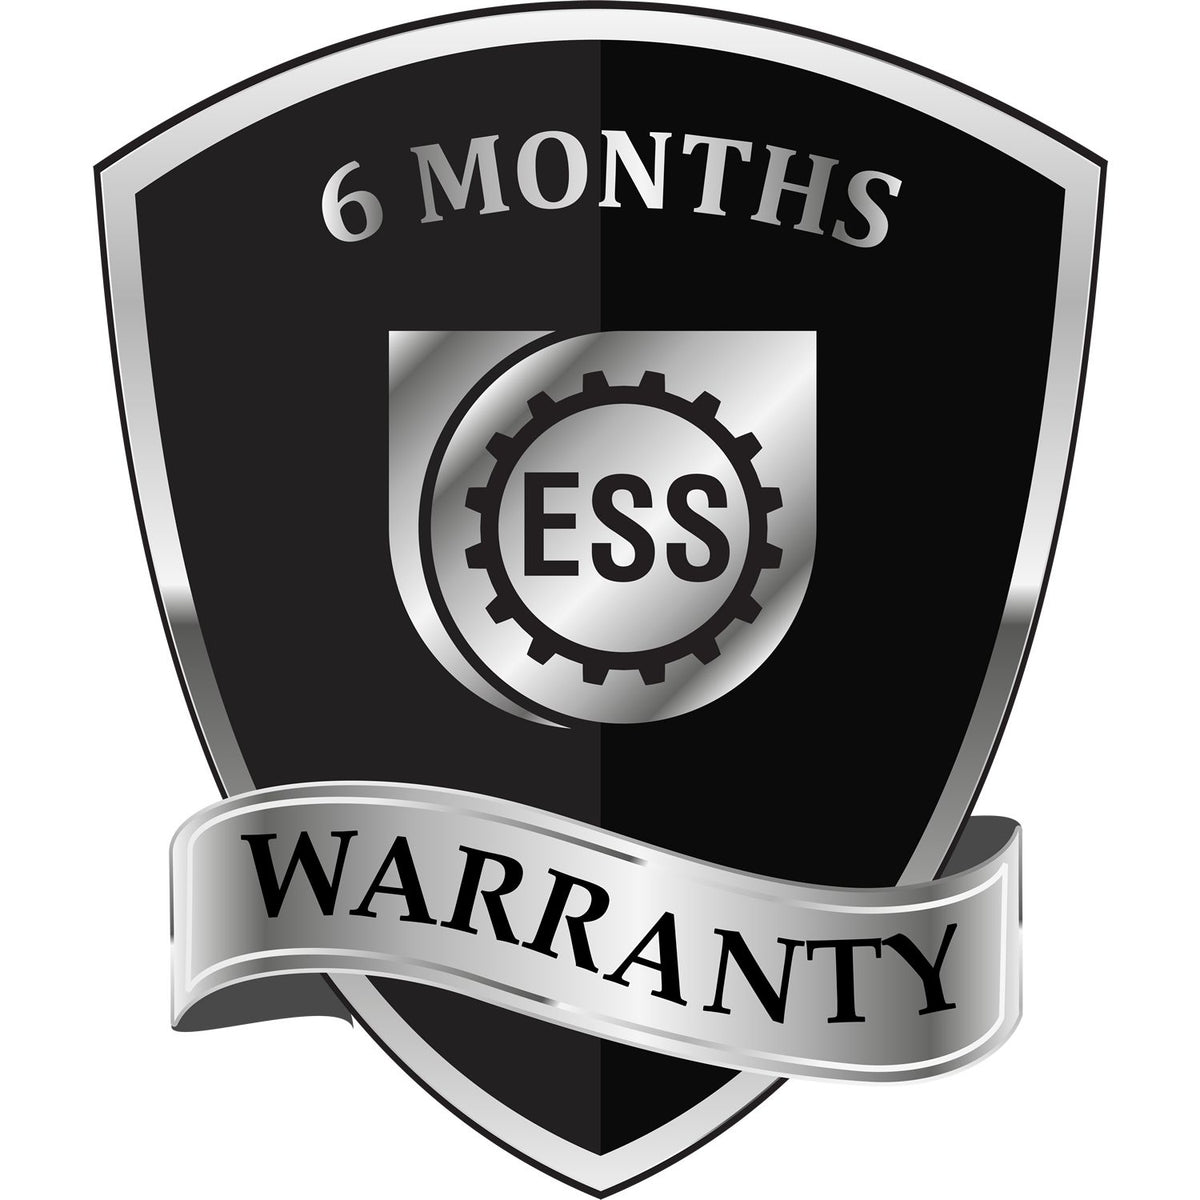 A badge or emblem showing a warranty icon for the PSI Minnesota Notary Stamp